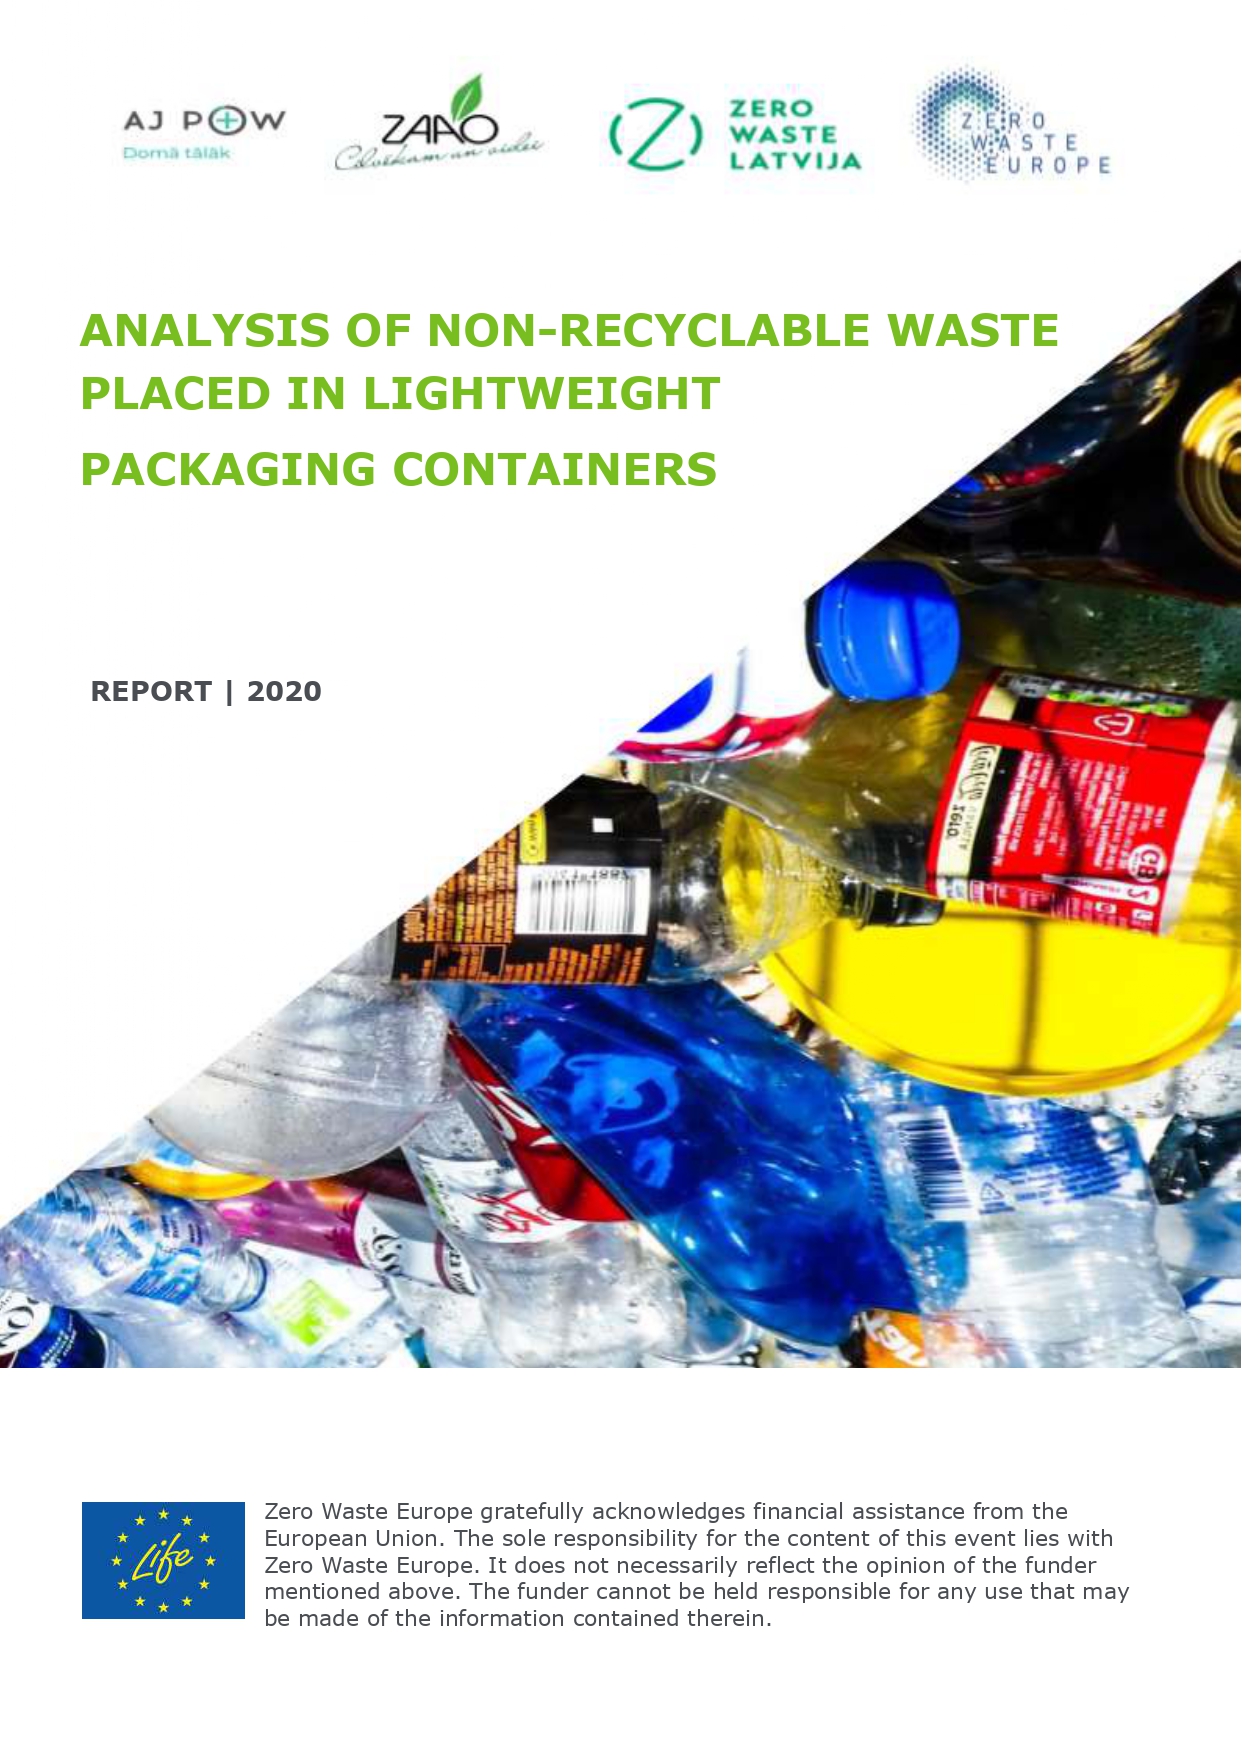 Analysis of non-recyclable waste placed in lightweight packaging containers